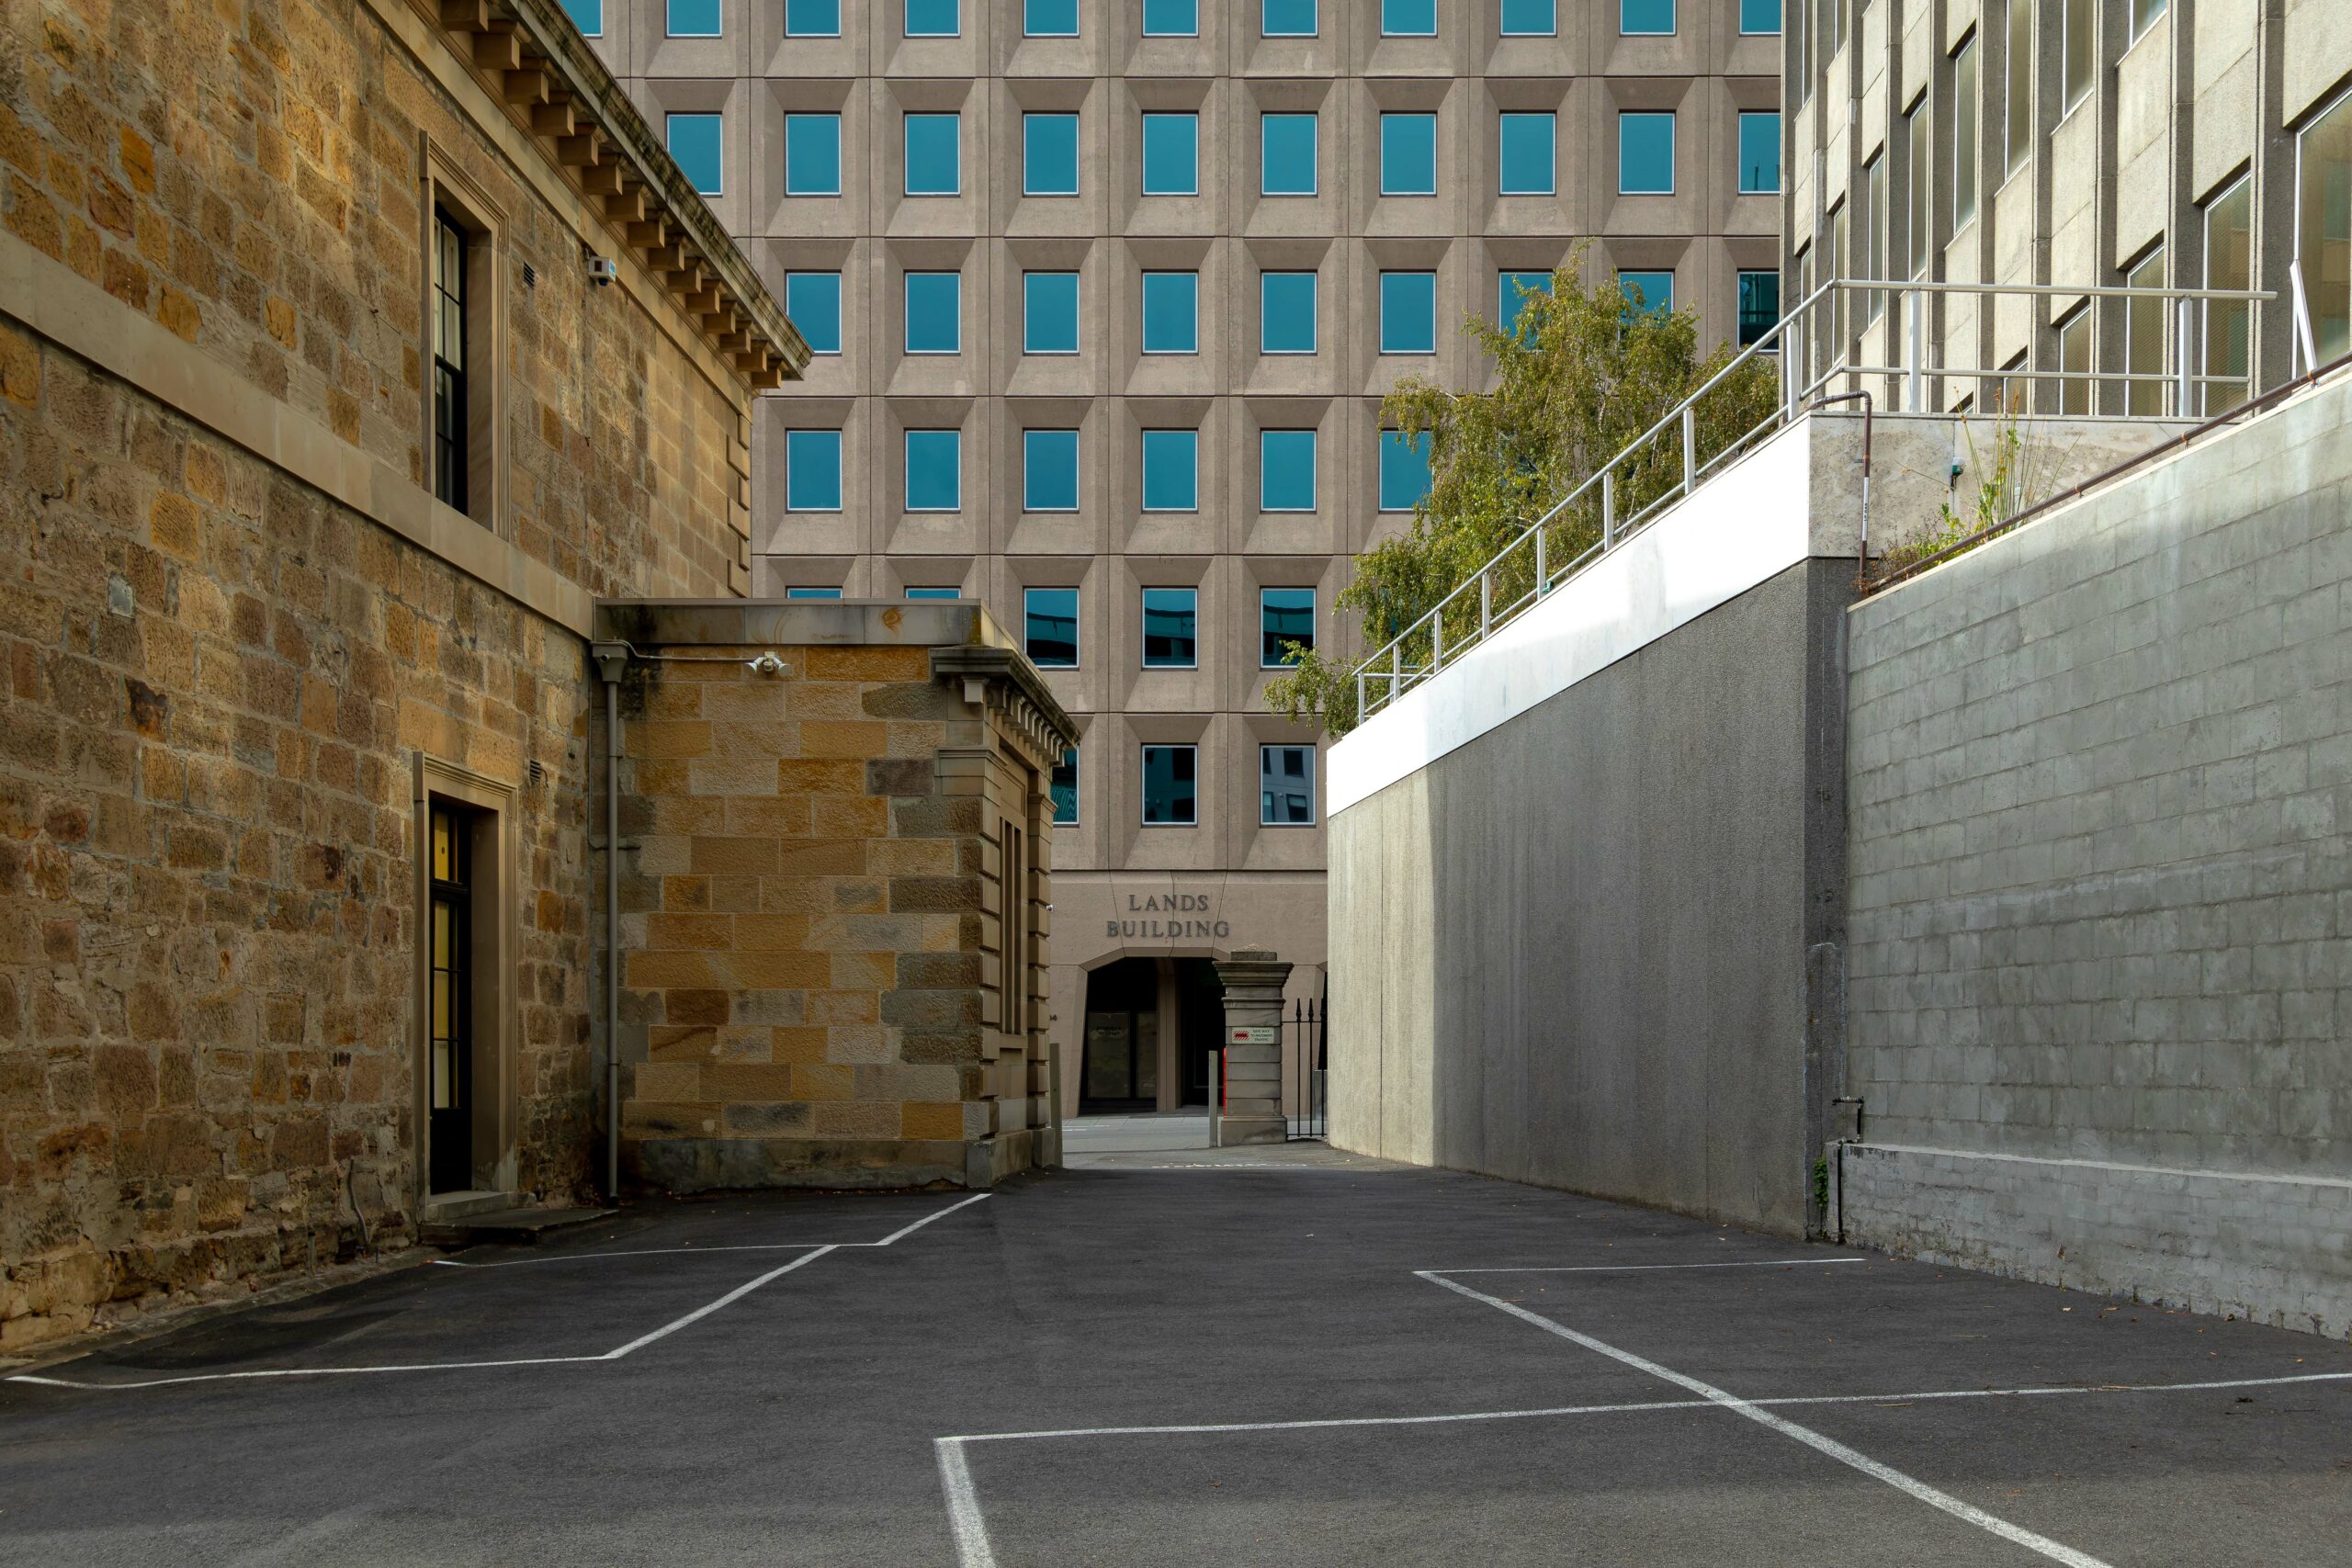 a large concrete building with rows of identical windows, seen in between an old sandstone building and a concrete wall